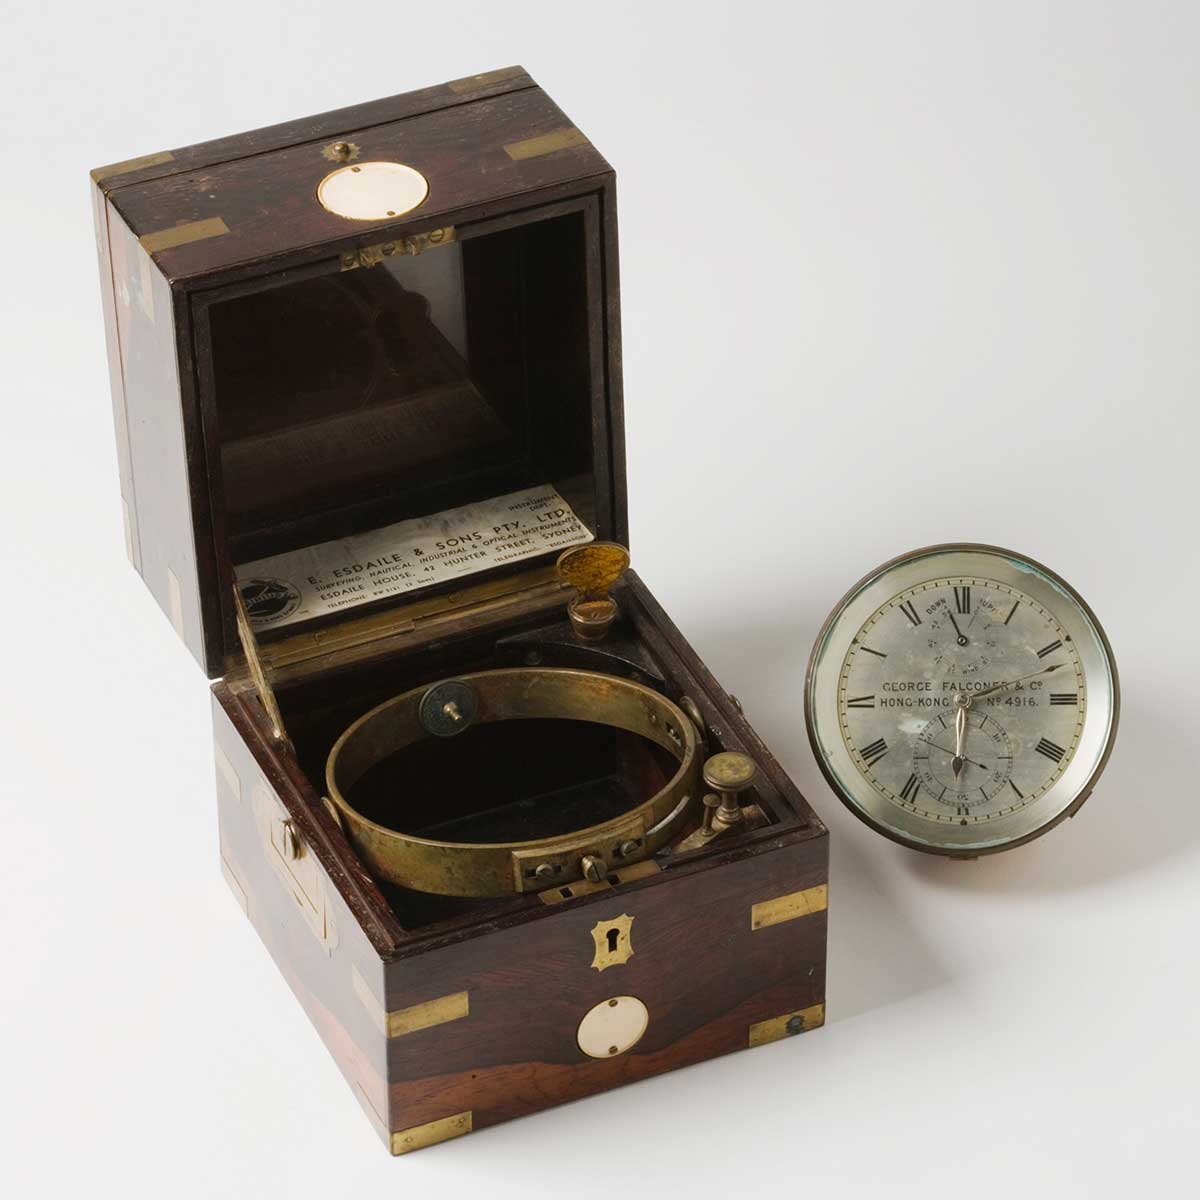 A metal chronometer sits next to a dark coloured wooden box with brass fittings. The face of the chronometer reads 'GEORGE FALCONER & Co. / HONG KONG / No. 4916.' and a label with 'E.ESDALE & SONS PTY LTD' is stuck on the inside of the box.